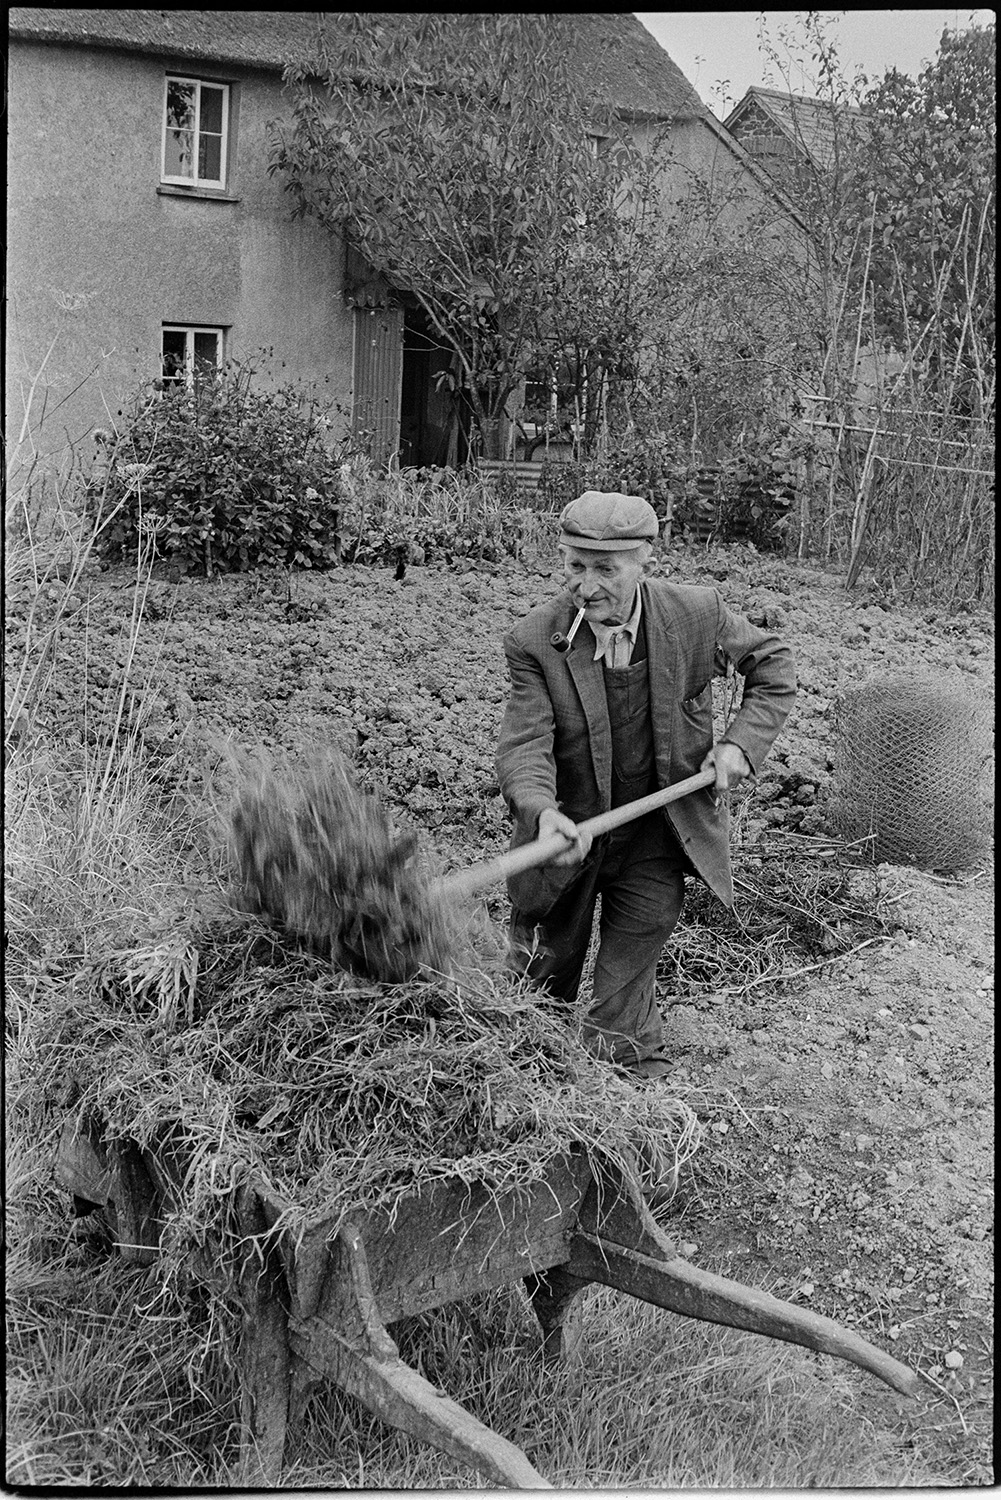 Farmer spreading muck on his garden, wheelbarrow. 
[Gordon Sanders spreading manure from a wheelbarrow onto his garden, using a fork, at Reynards Park, Ashreigney. He is smoking a pipe. The house and a roll of chicken wire can be seen in the background.]